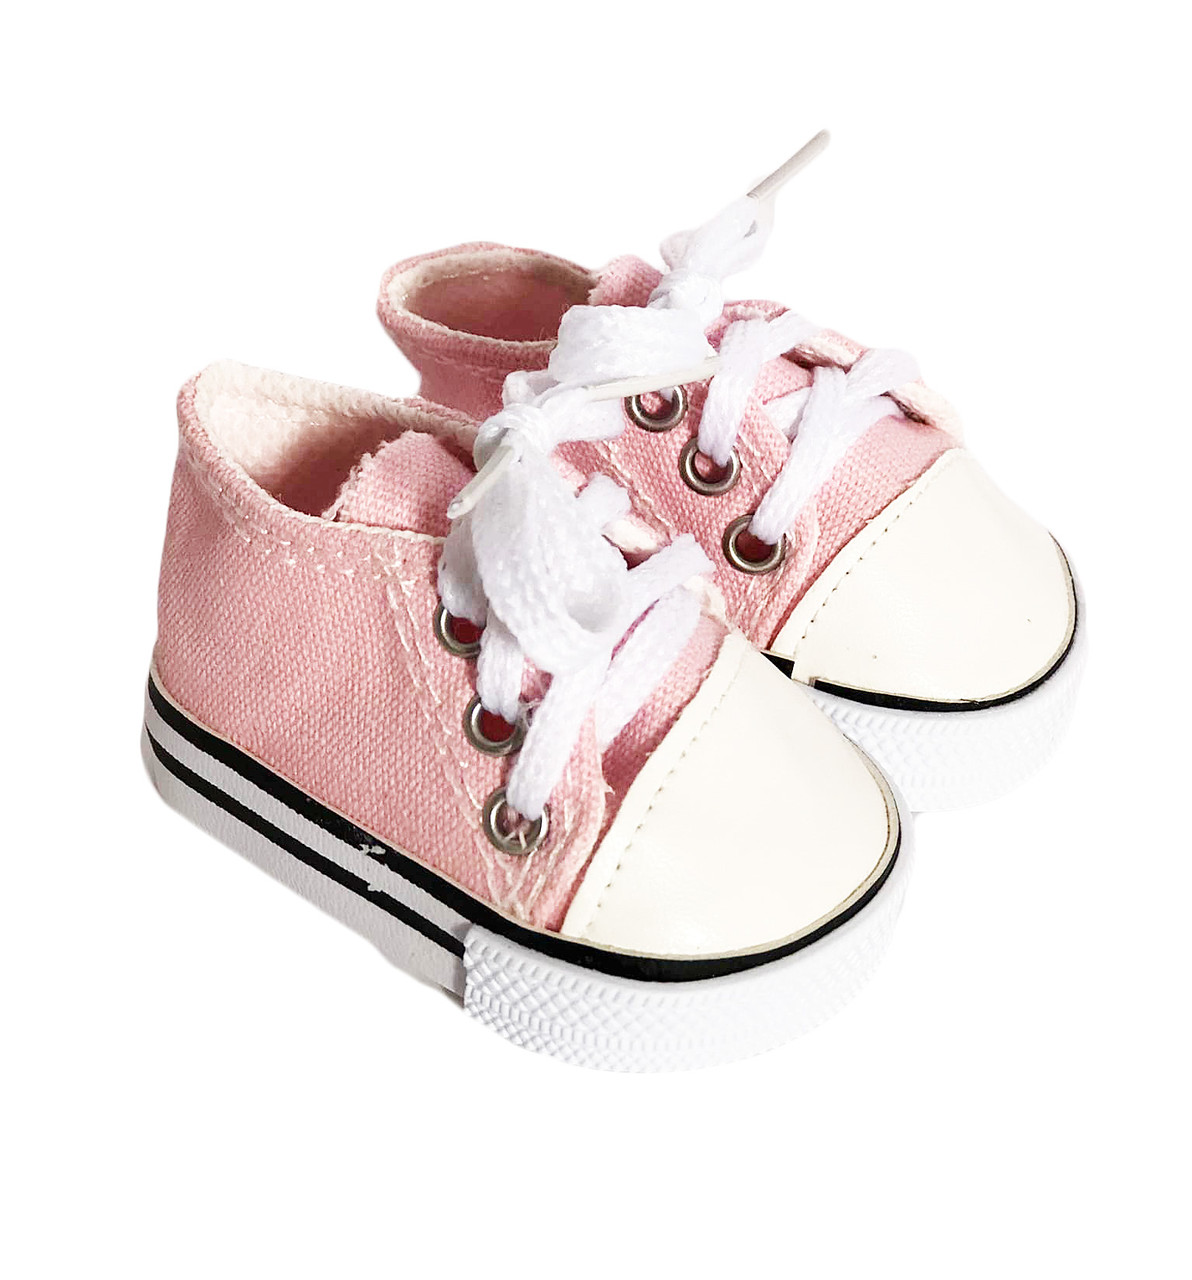 Wacht even Kroniek Seraph MBD® Light Pink Canvas Sneakers- New Inventory - Wholesale Doll Clothes